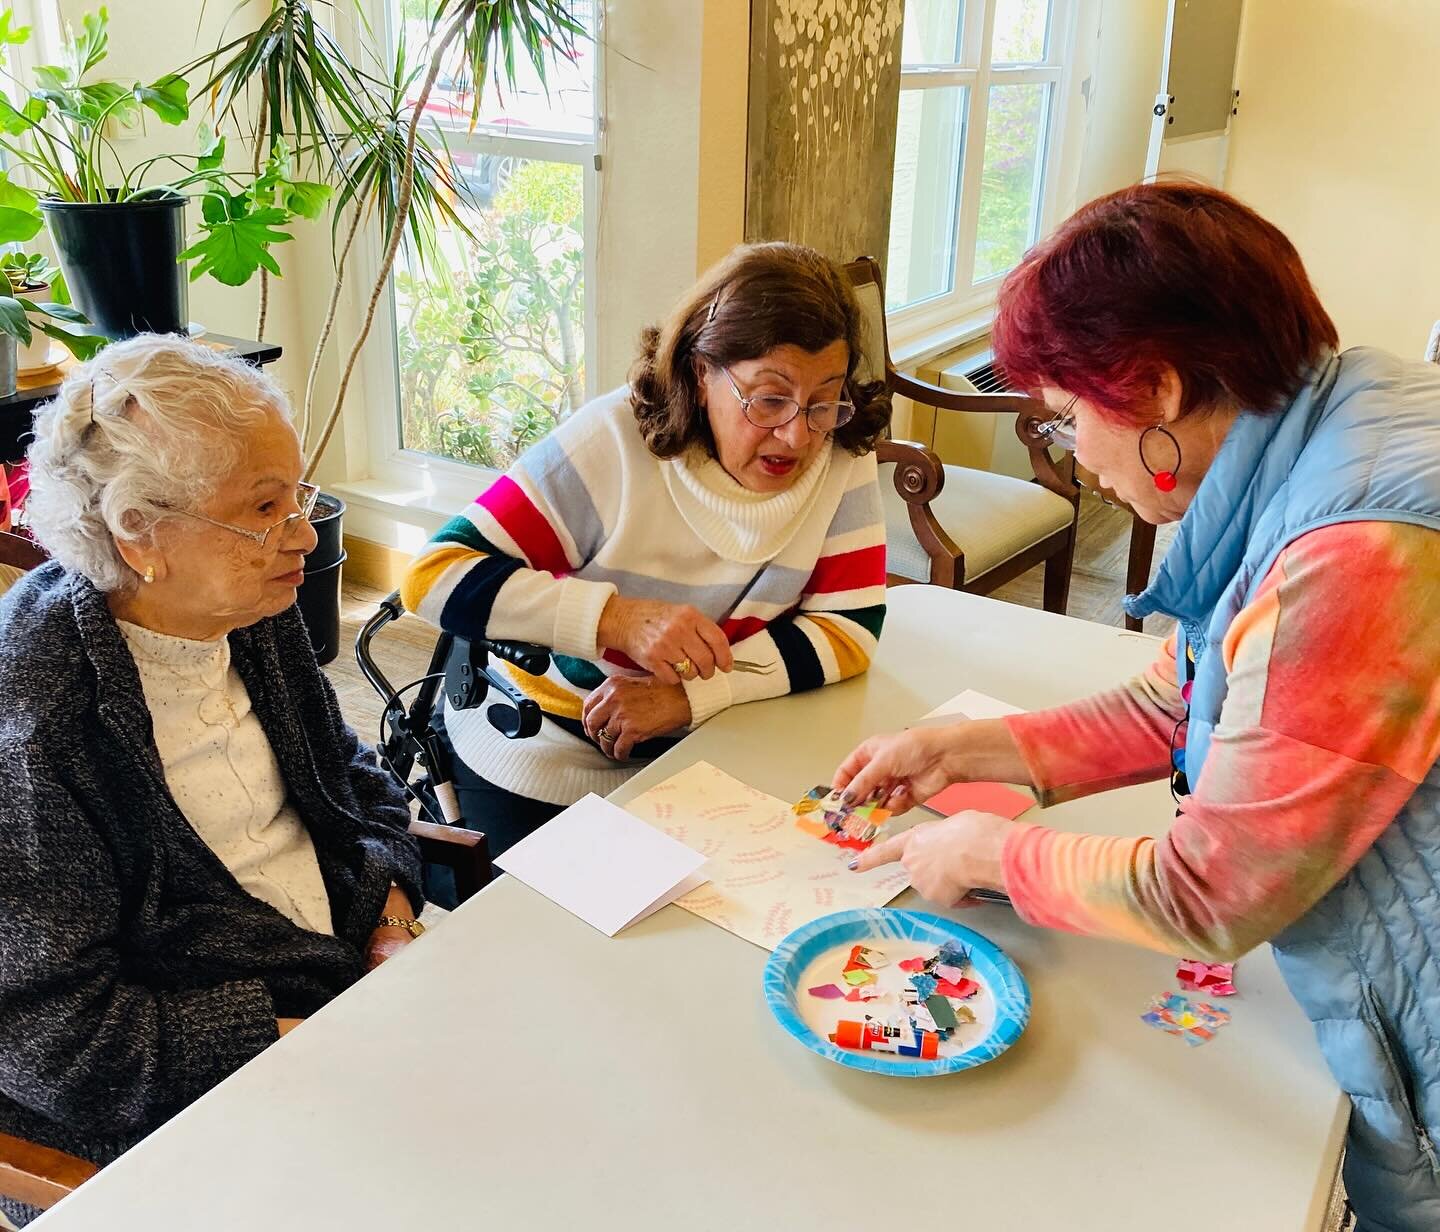 Art Bias&rsquo; Inna Zatulovsky taught another popular card making class at one of the HIP Housing residences in San Mateo last week.  Inna taught residents how to make beautiful greeting cards with items they may even have at home. 

Suyin Nichols, 